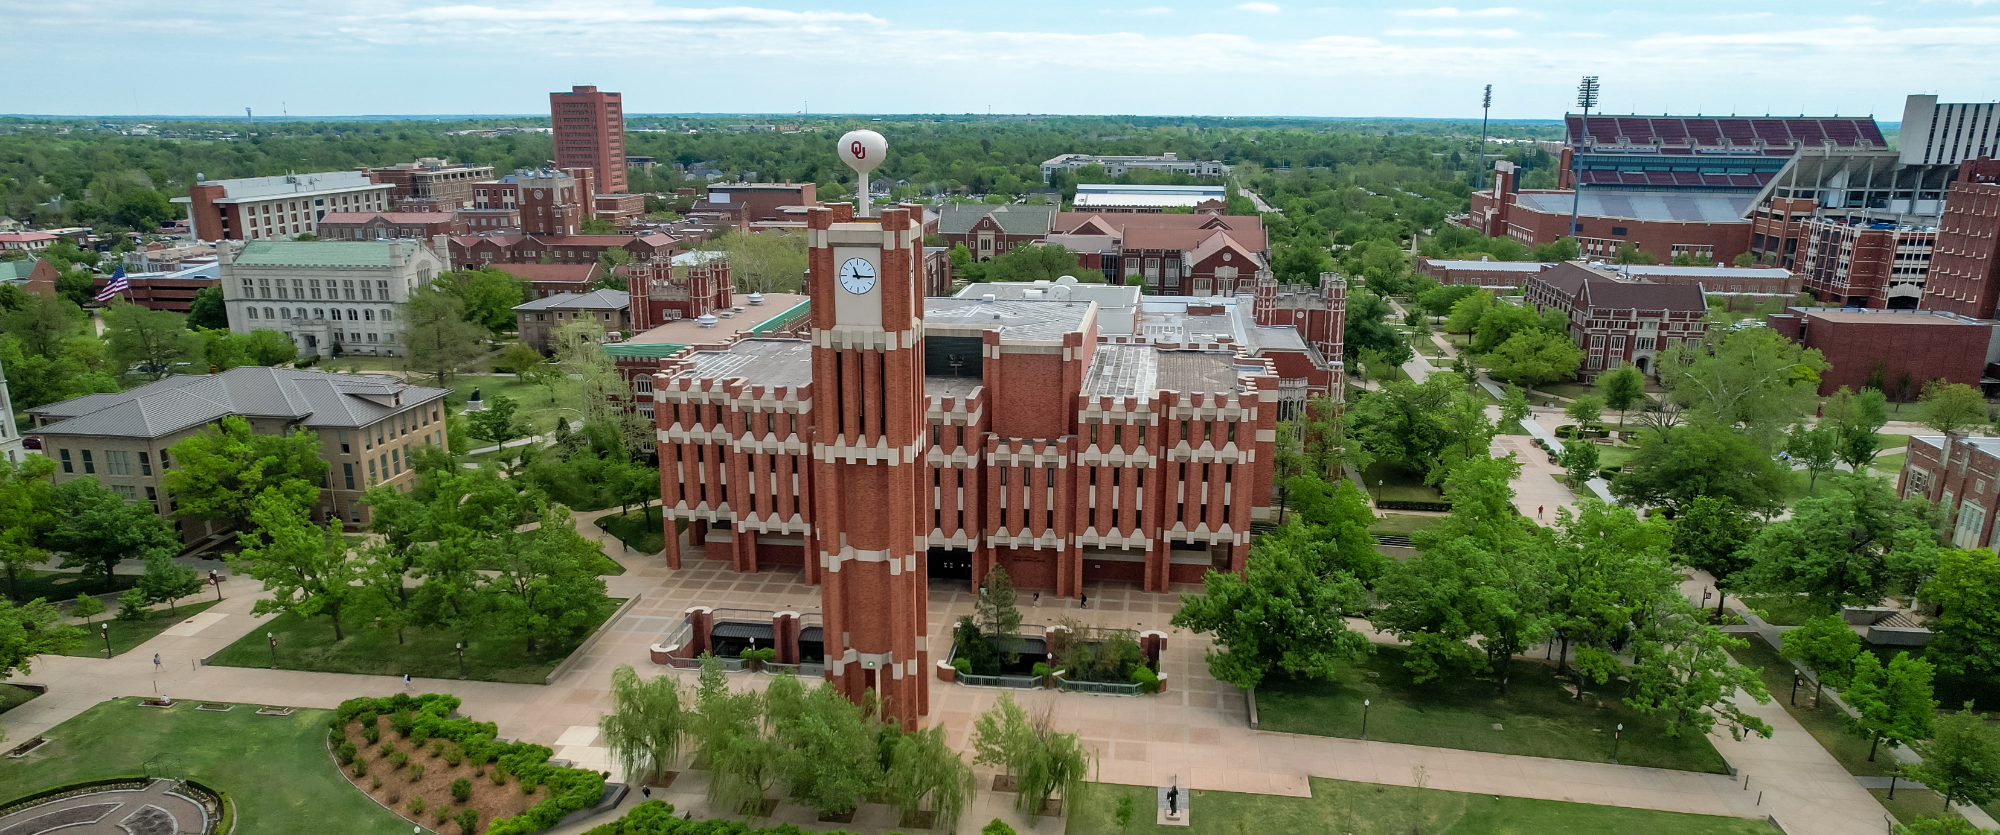 Aerial view of the OU clock tower and Bizzell Memorial Library